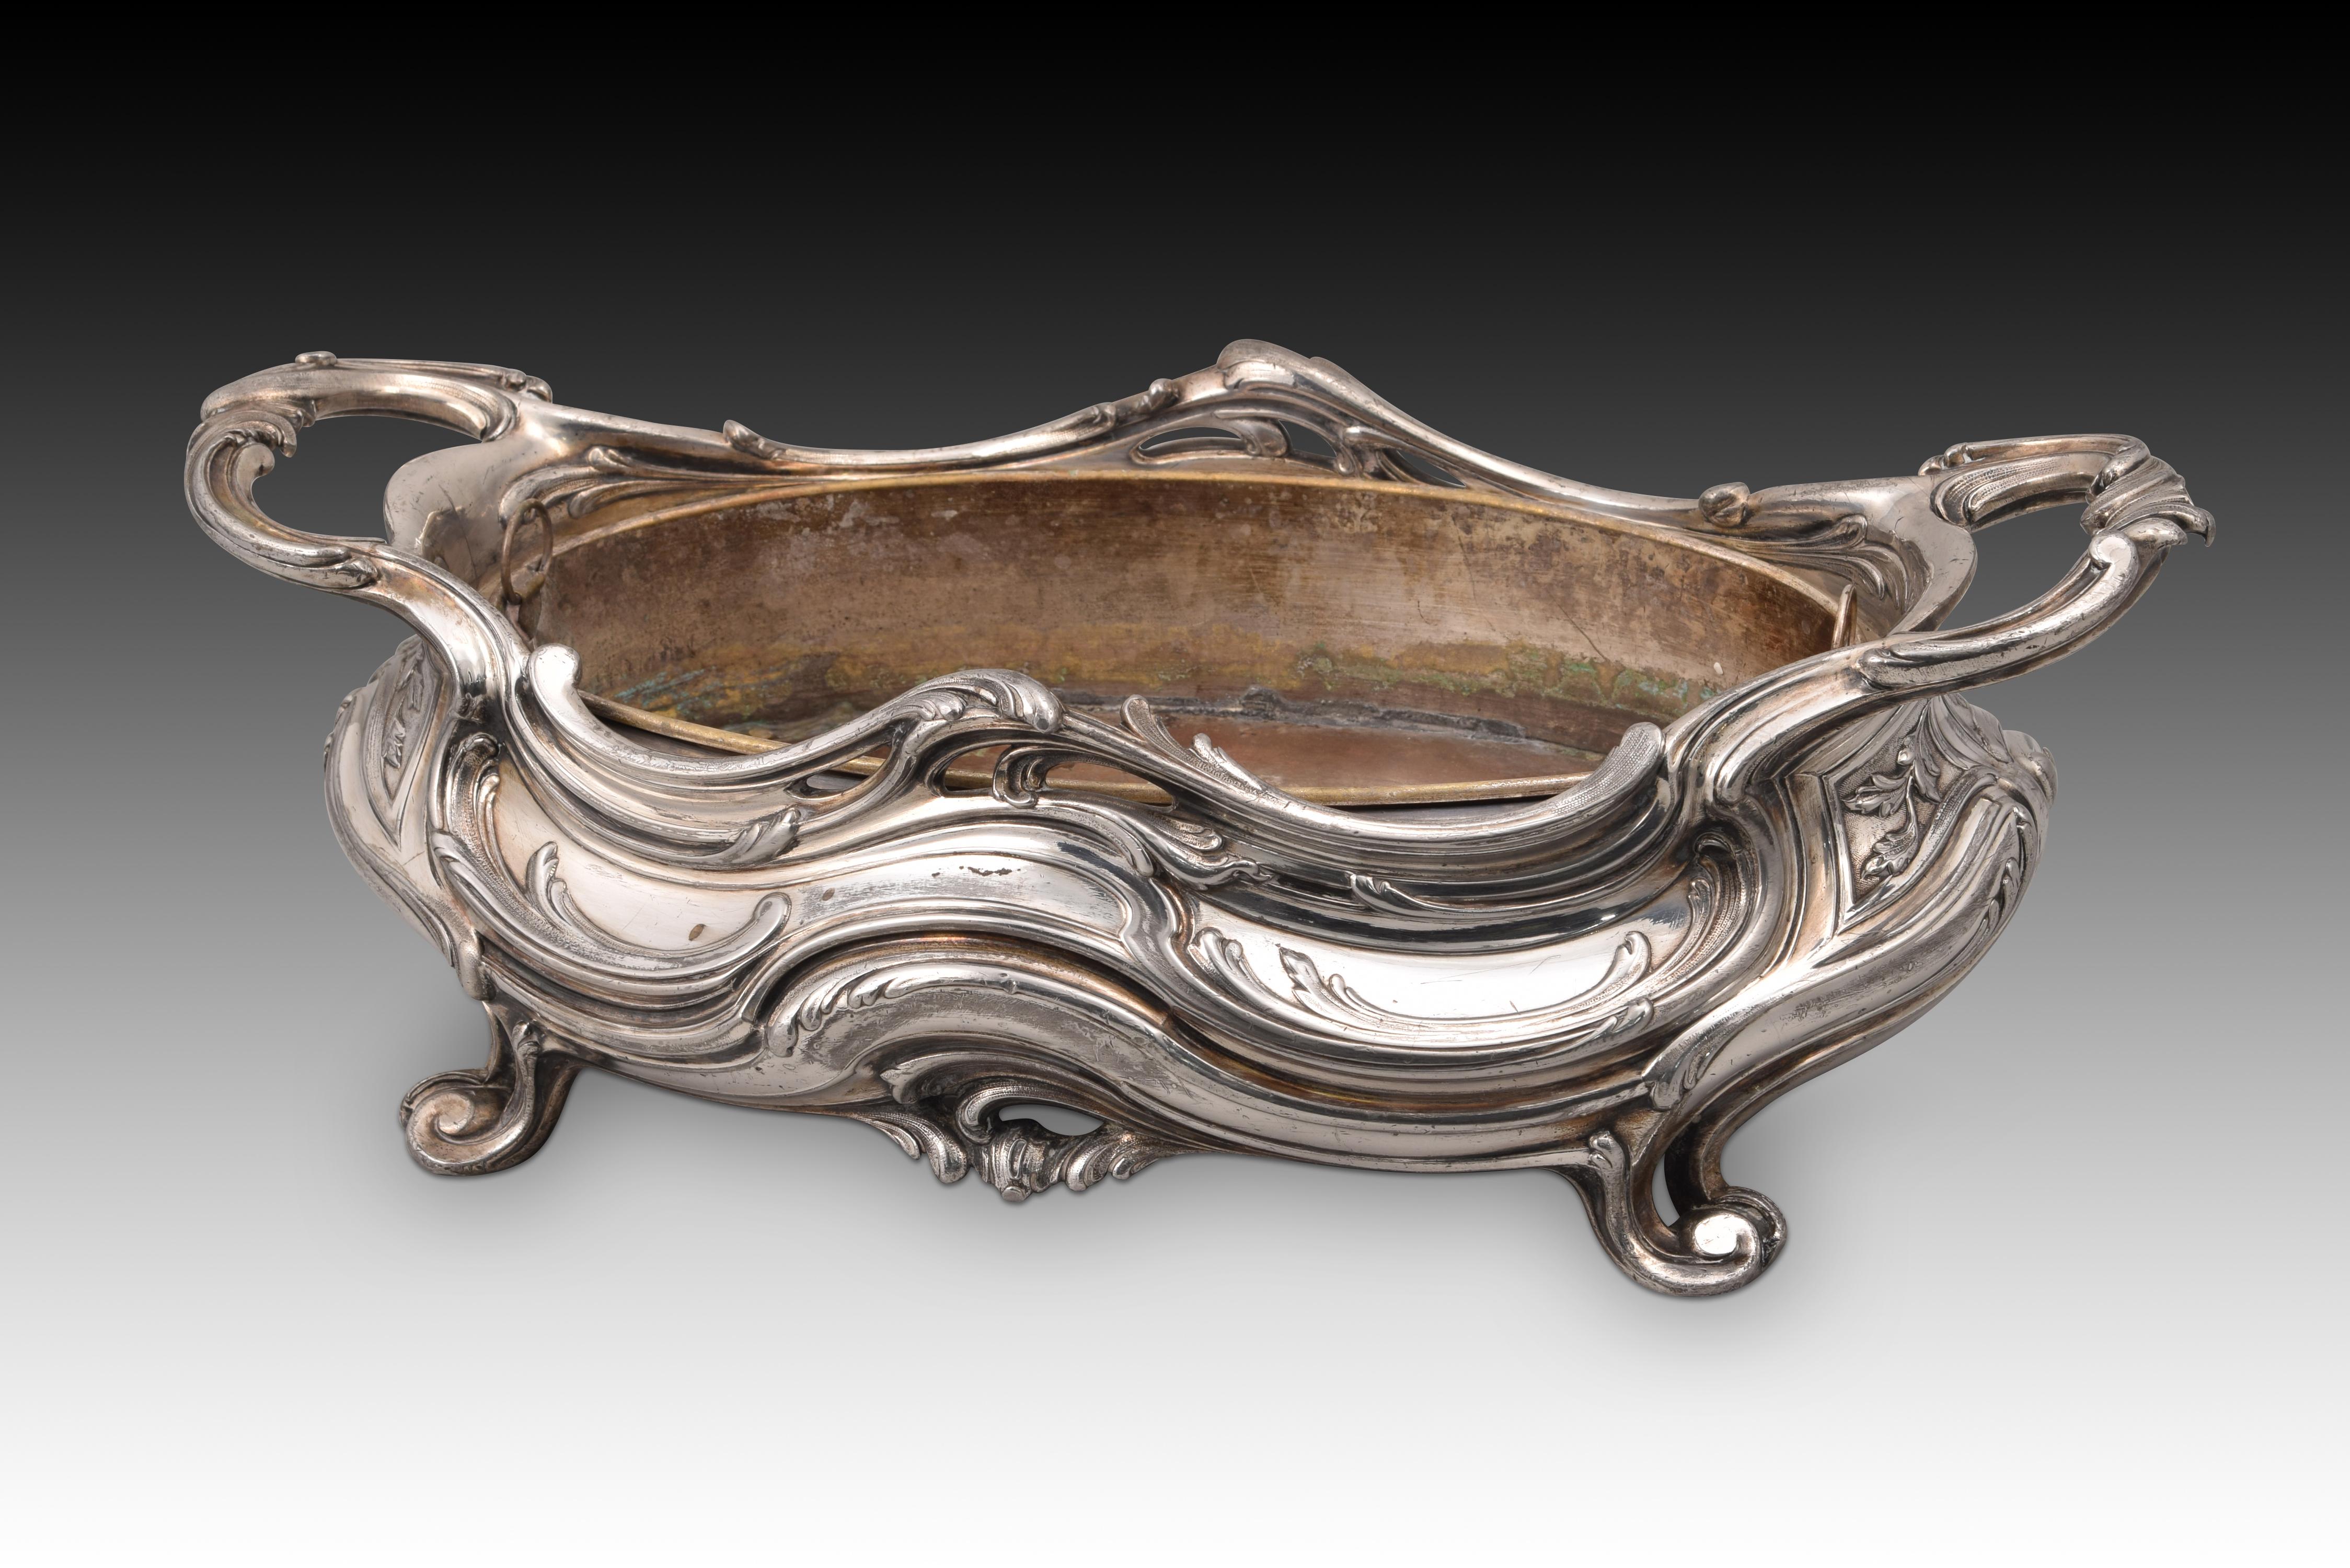 Modernist centerpiece. Tin, metal. Victor Saglier, late 19th century. 
With marks. Flowers not included.
Centerpiece with an oval-shaped interior metal tray, with legs finished in volutes and an exterior decoration based on plant elements drawing